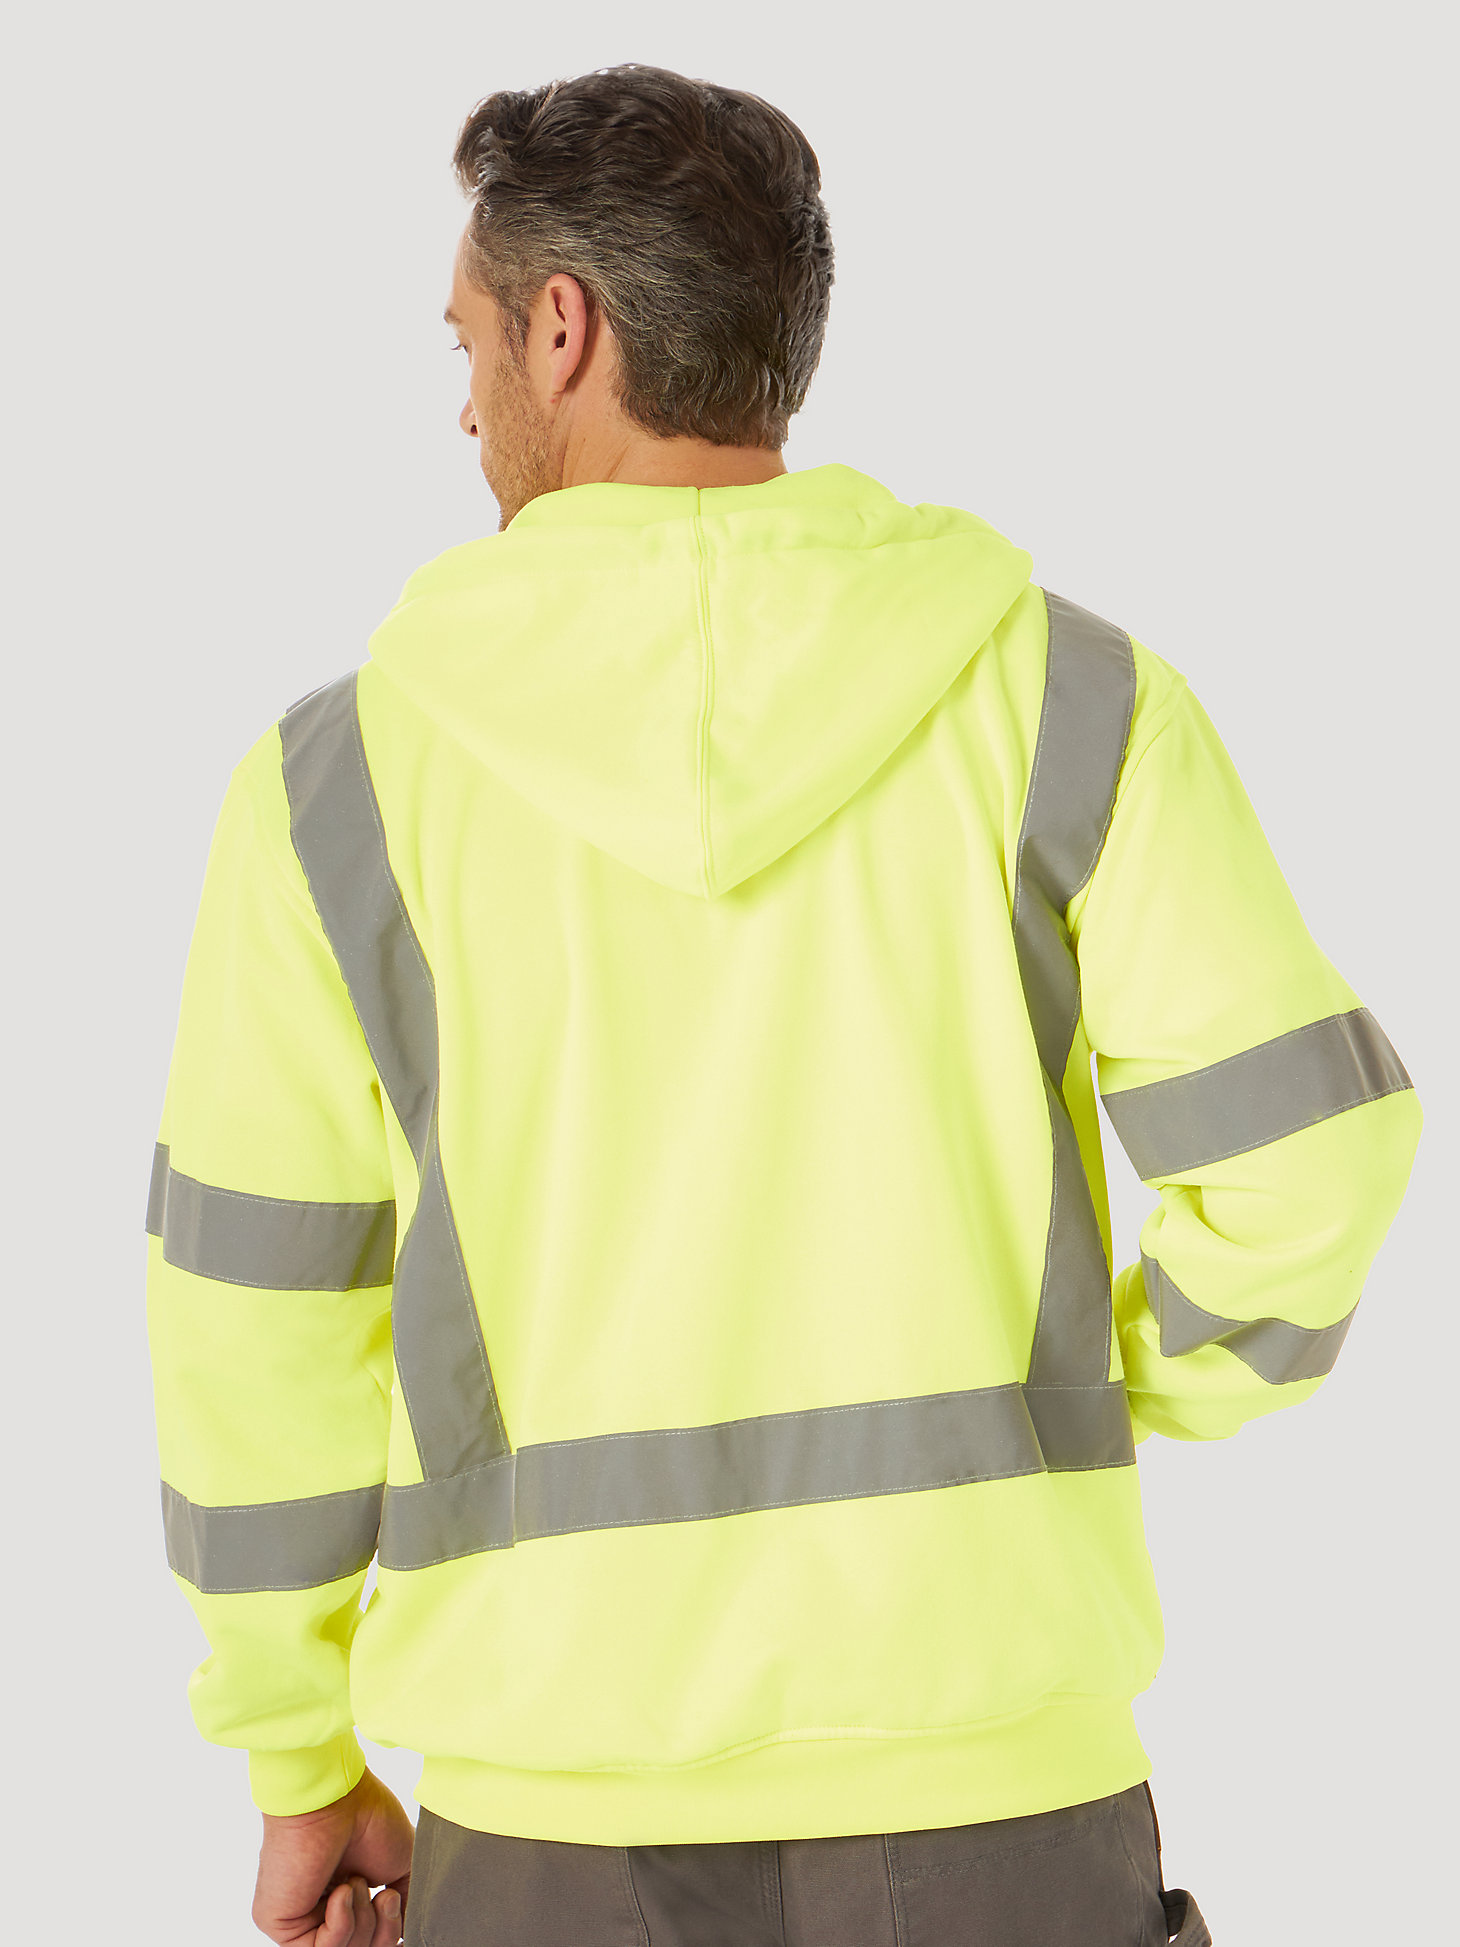 Wrangler® RIGGS Workwear® Long Sleeve High Visibility Hoodie in Safety Green alternative view 1